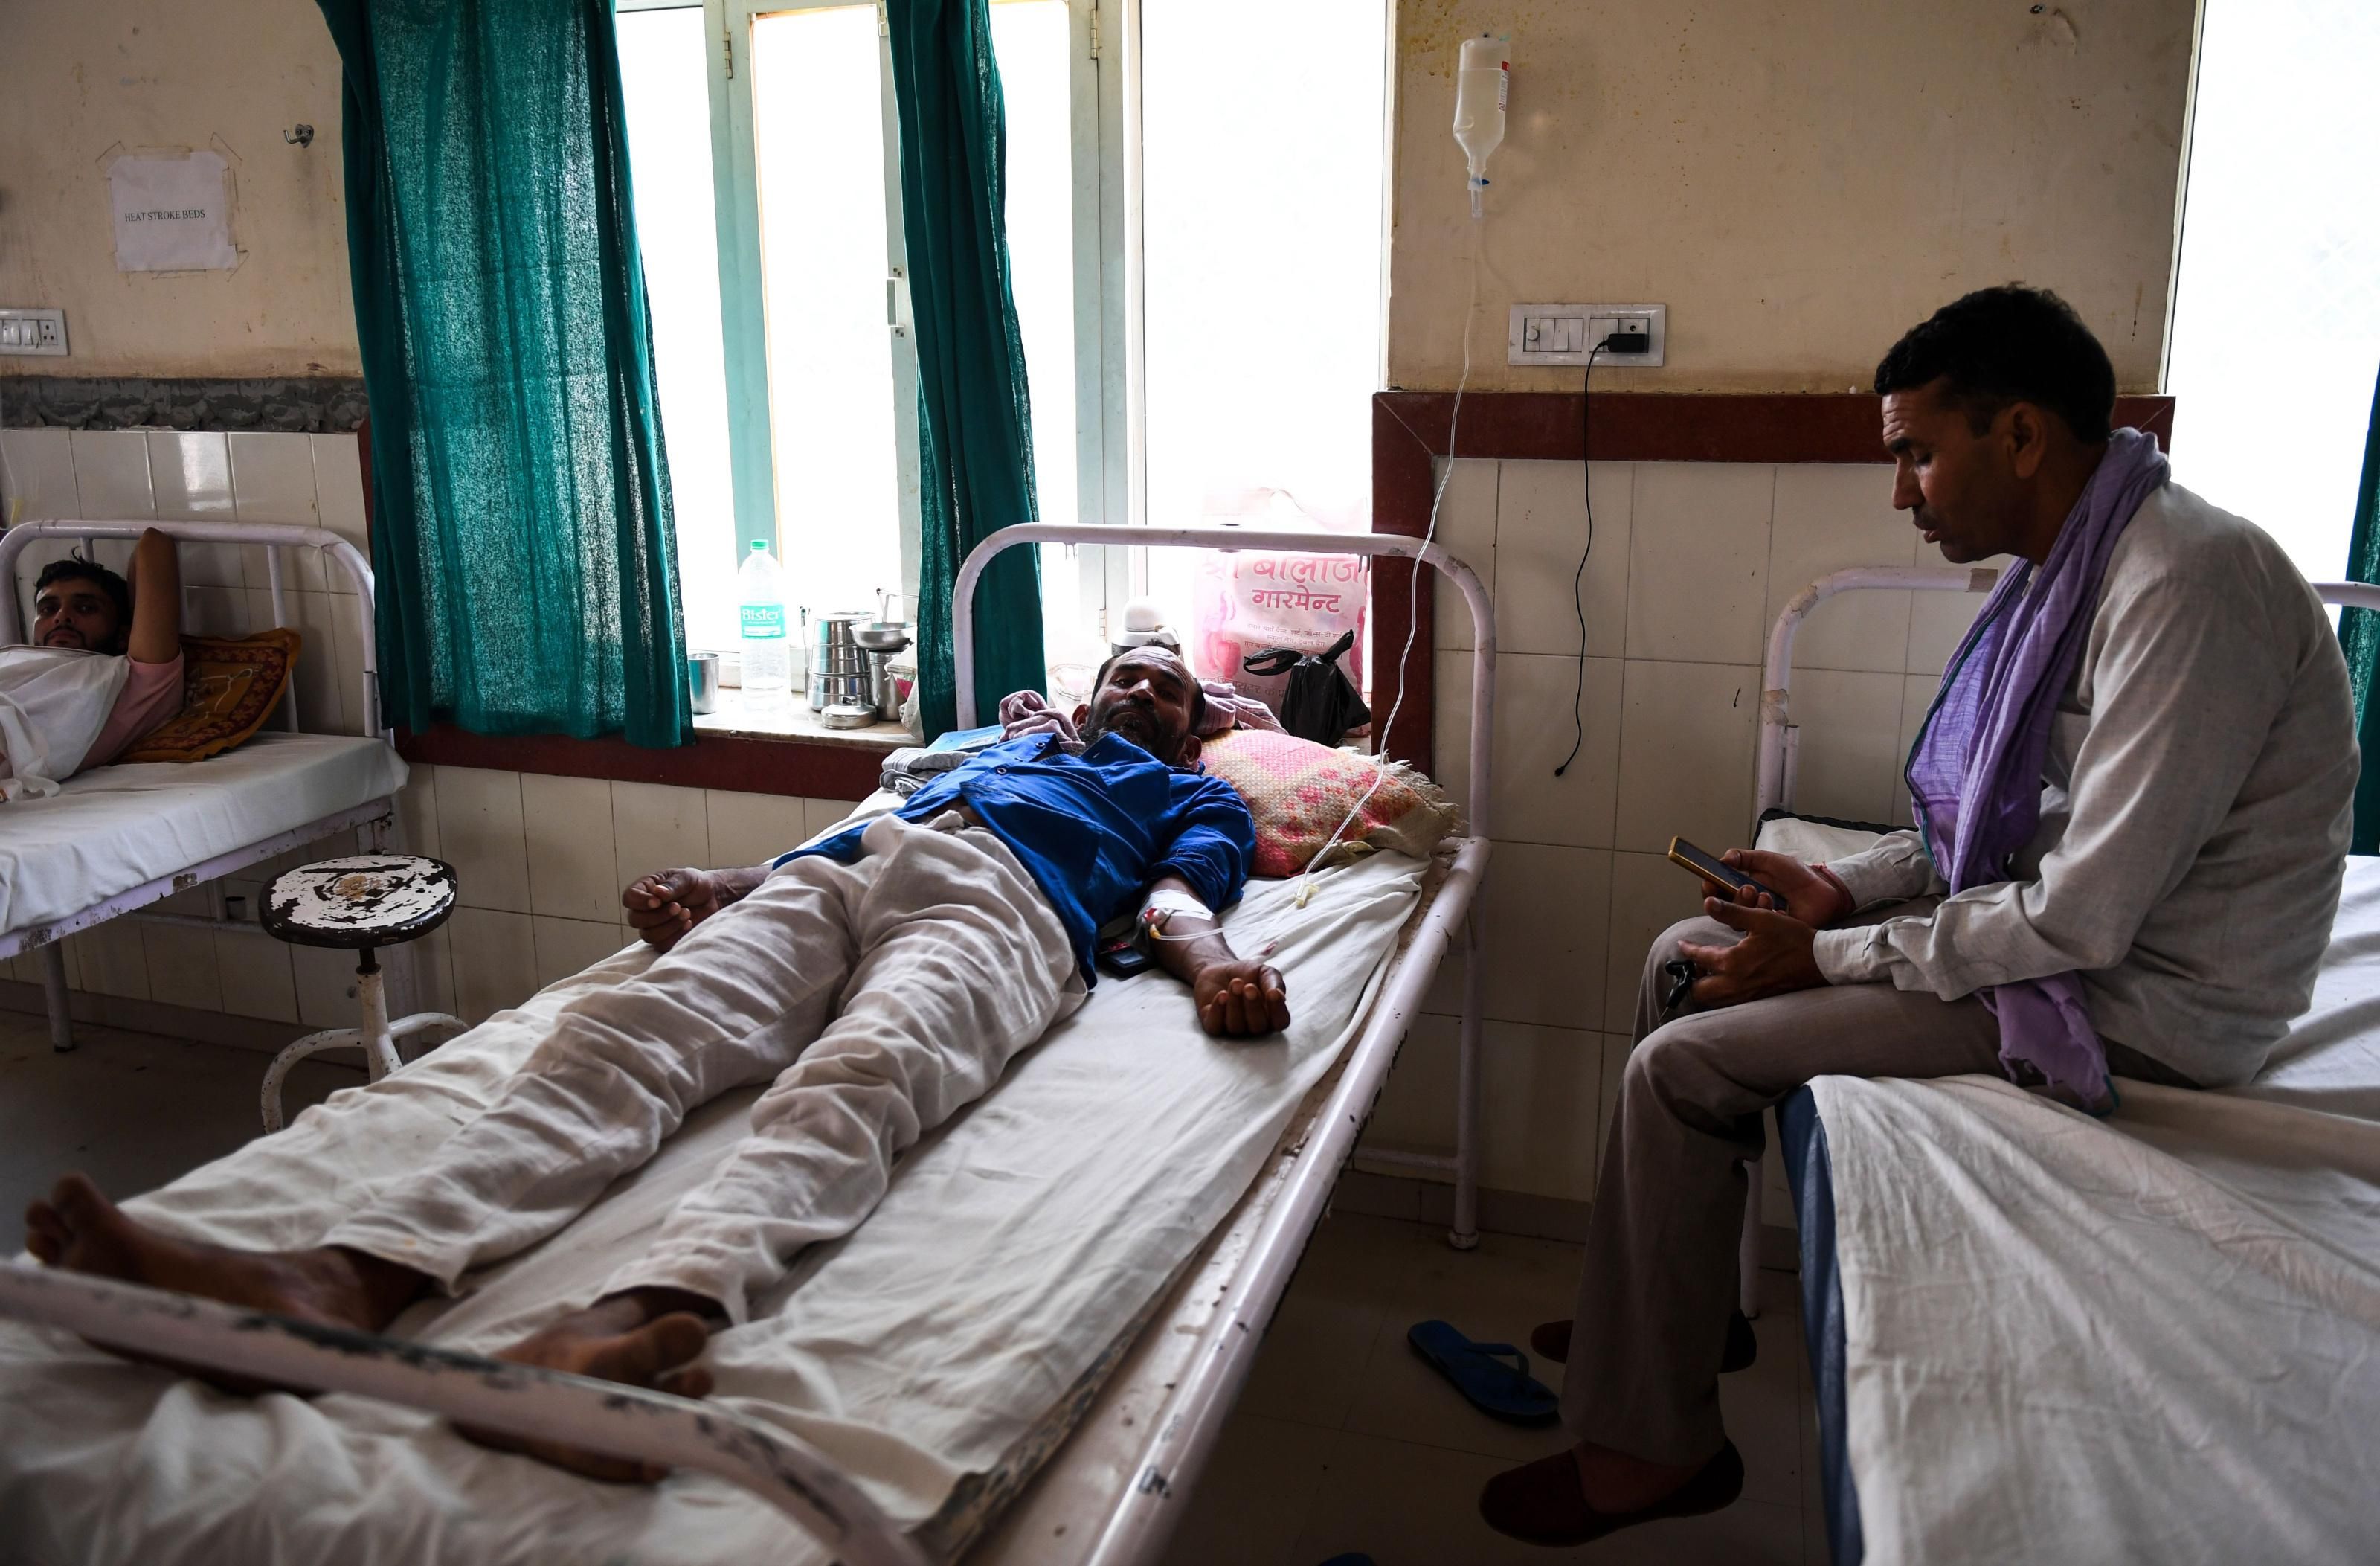 A person in India is hospitalized on June 4, 2019 after suffering heat stroke amid temperatures of 50°C (122 °F) in Churu, a city in the state of Rajasthan. (Photo: Money Sharma via Getty Images)